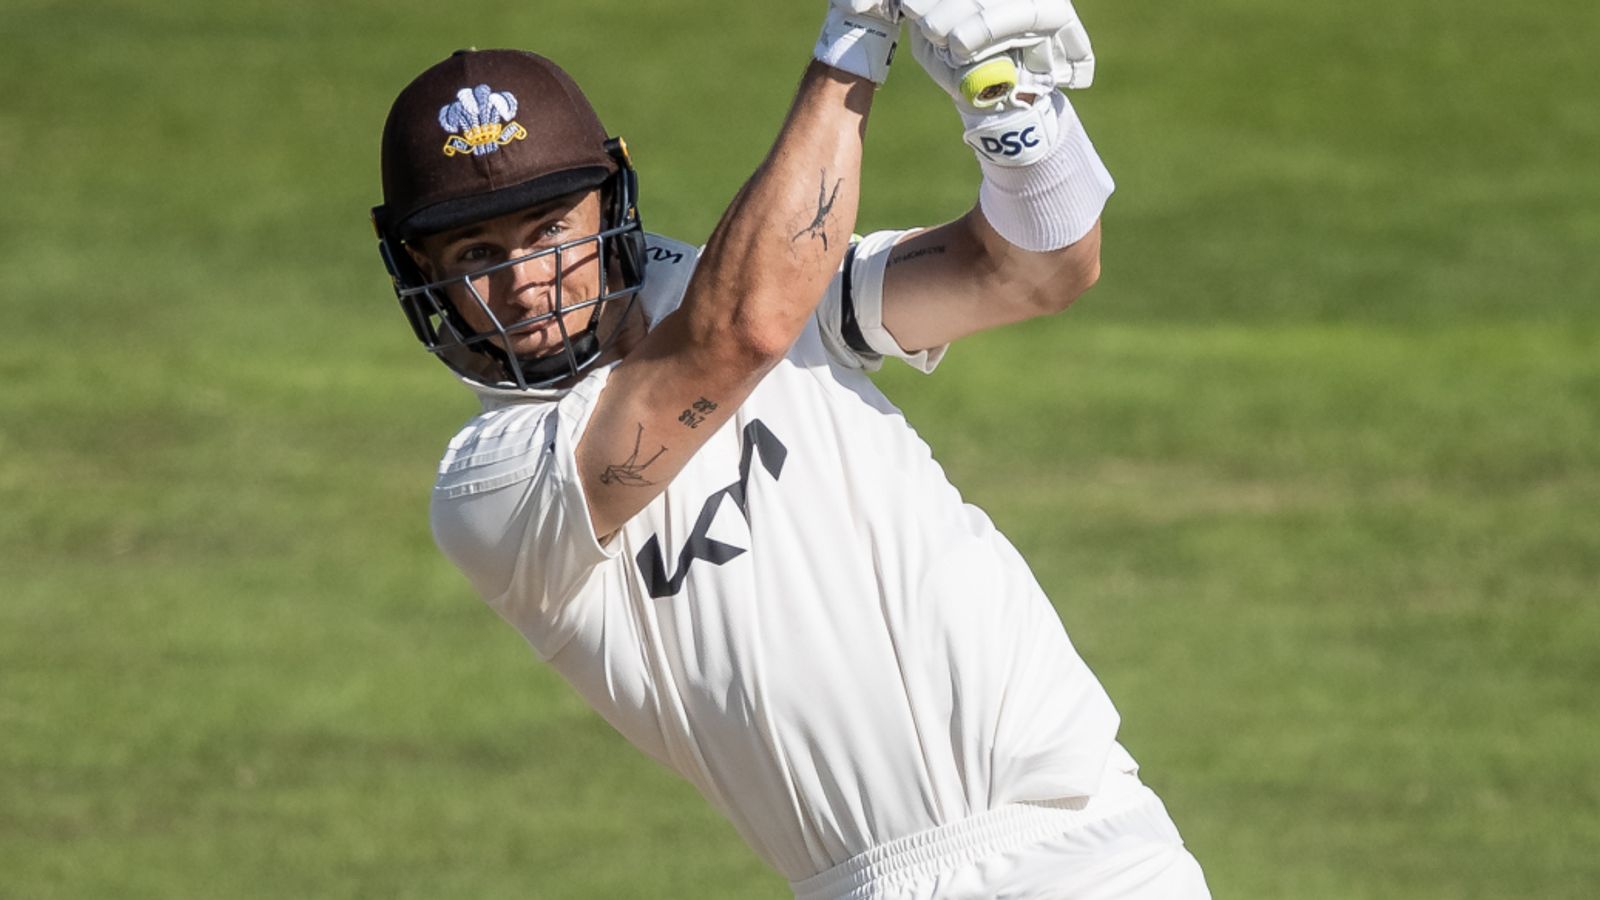 County championship round-up: Surrey step up title pursuit at Northamptonshire while Essex secure thrilling win